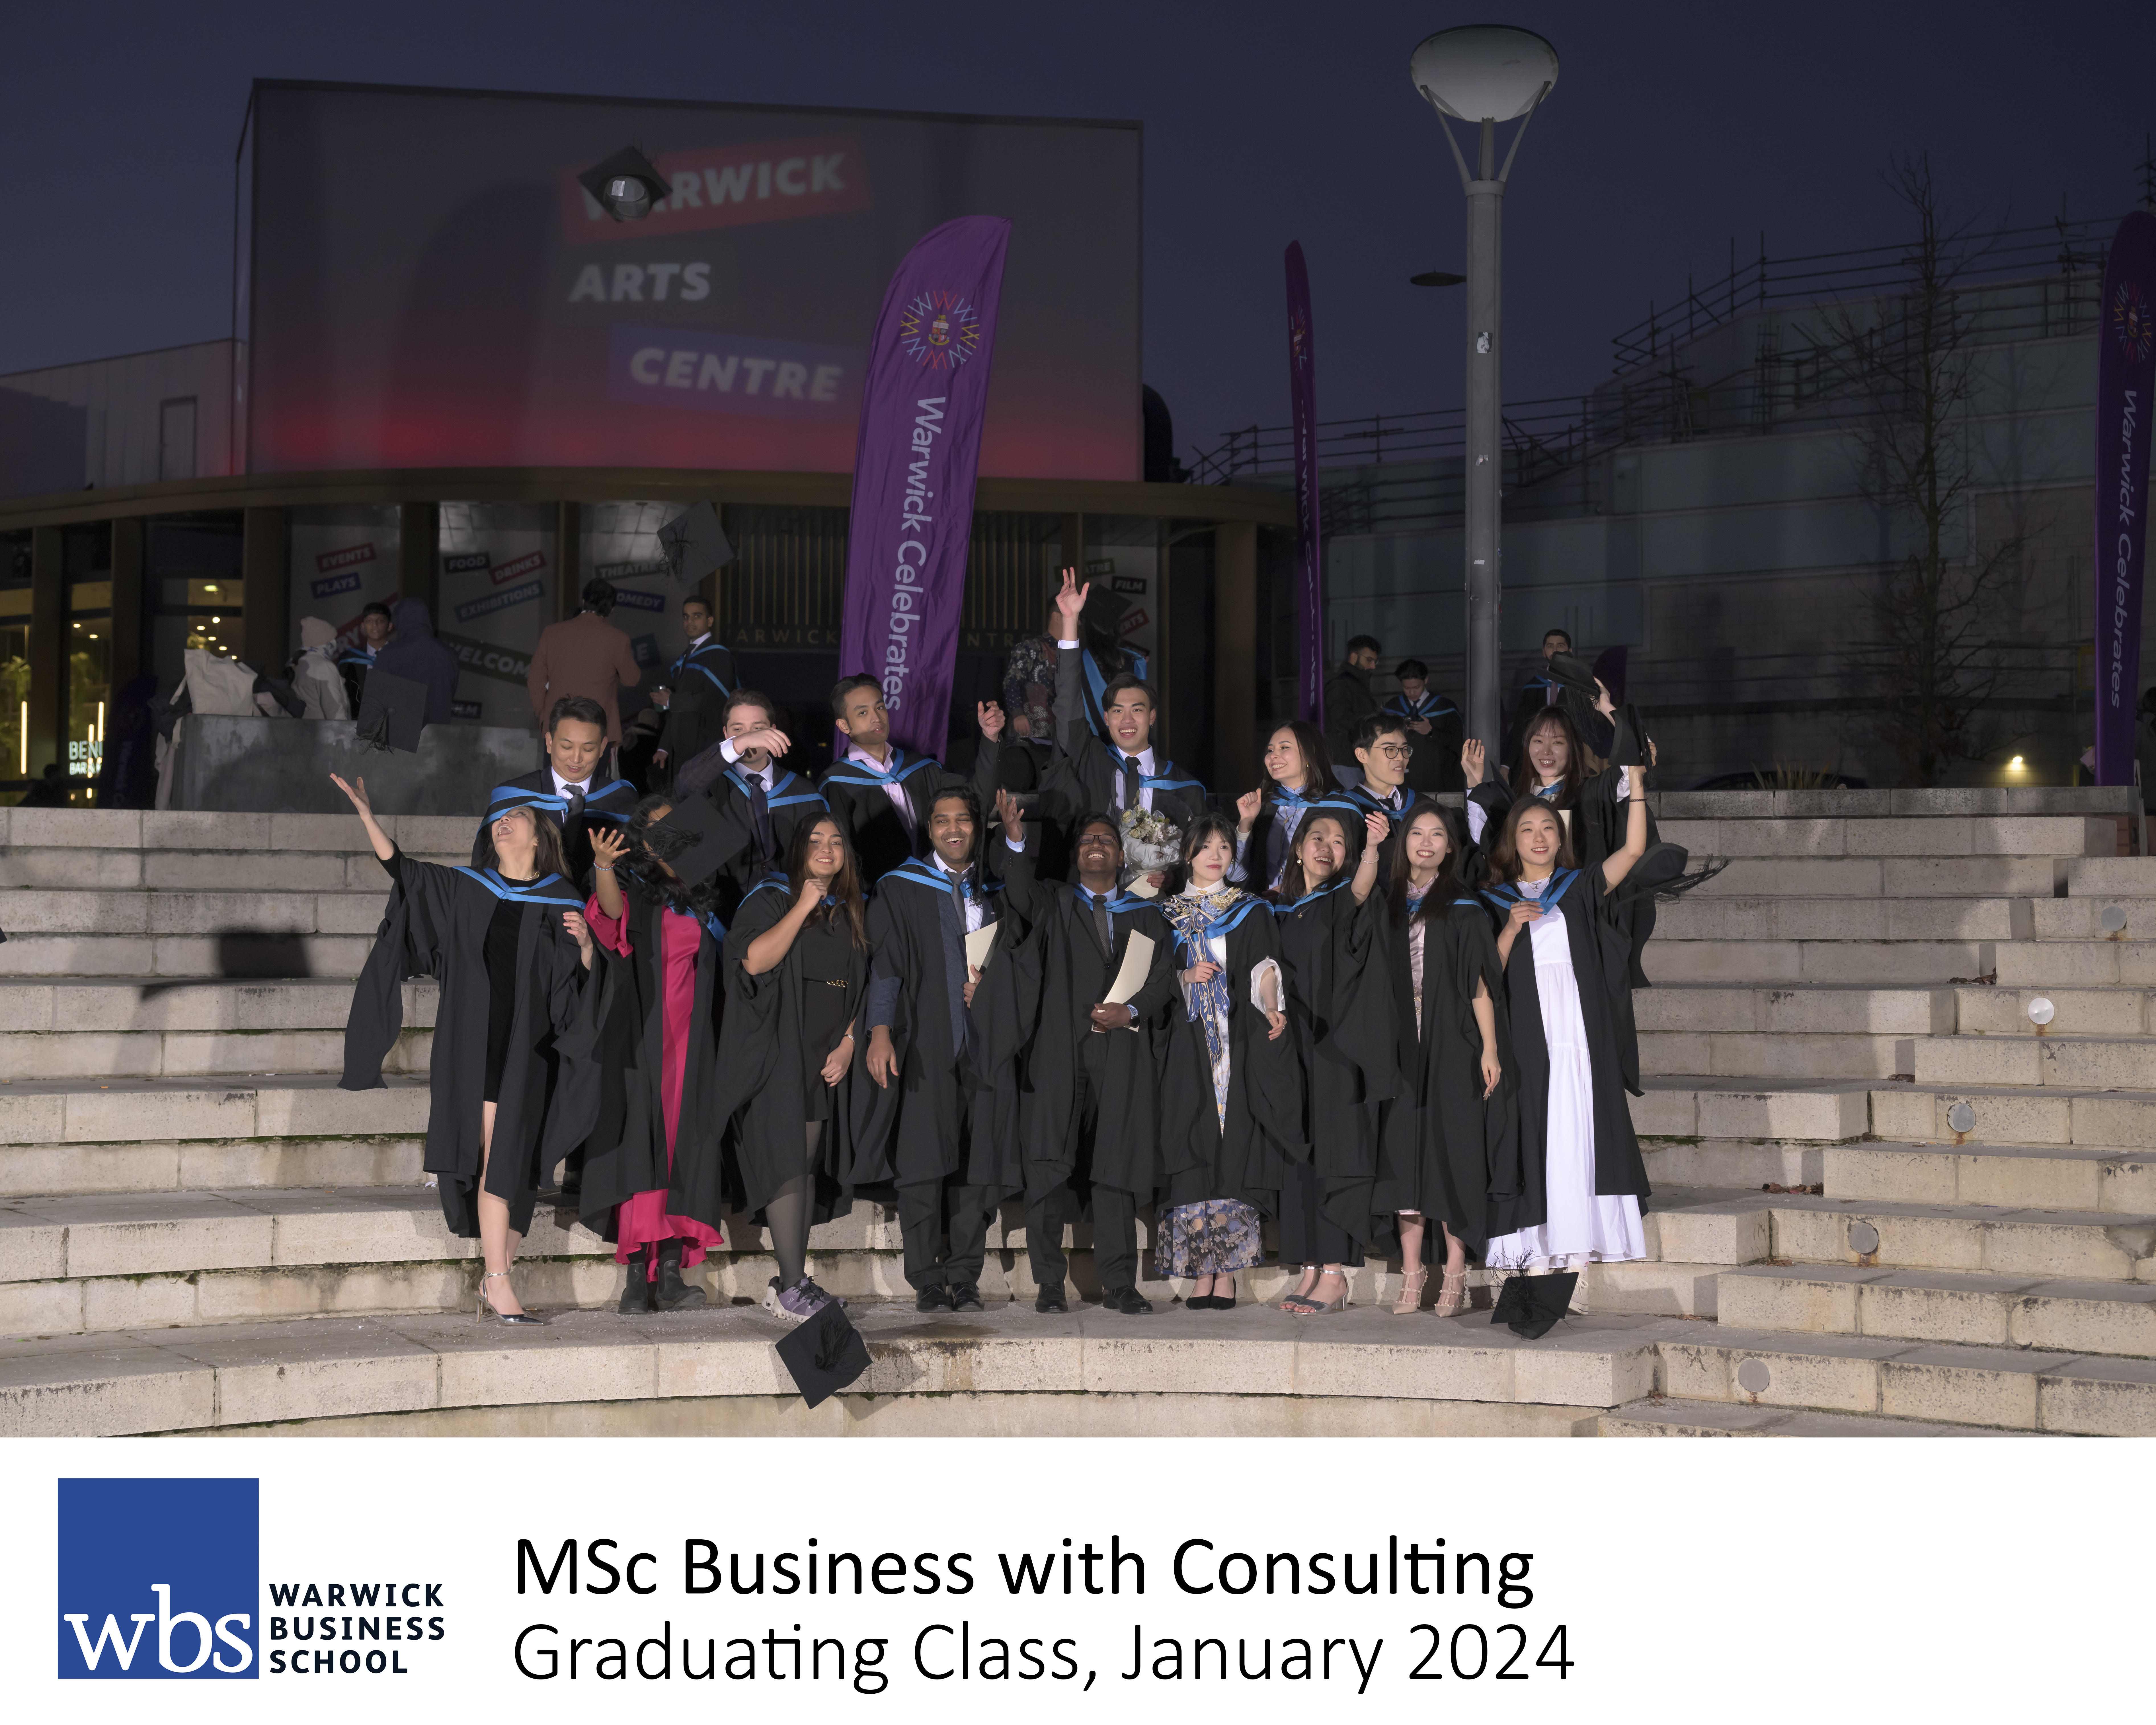 wbs_grad_jan_24_msc_business_with_consulting_hats_2_captioned.jpg